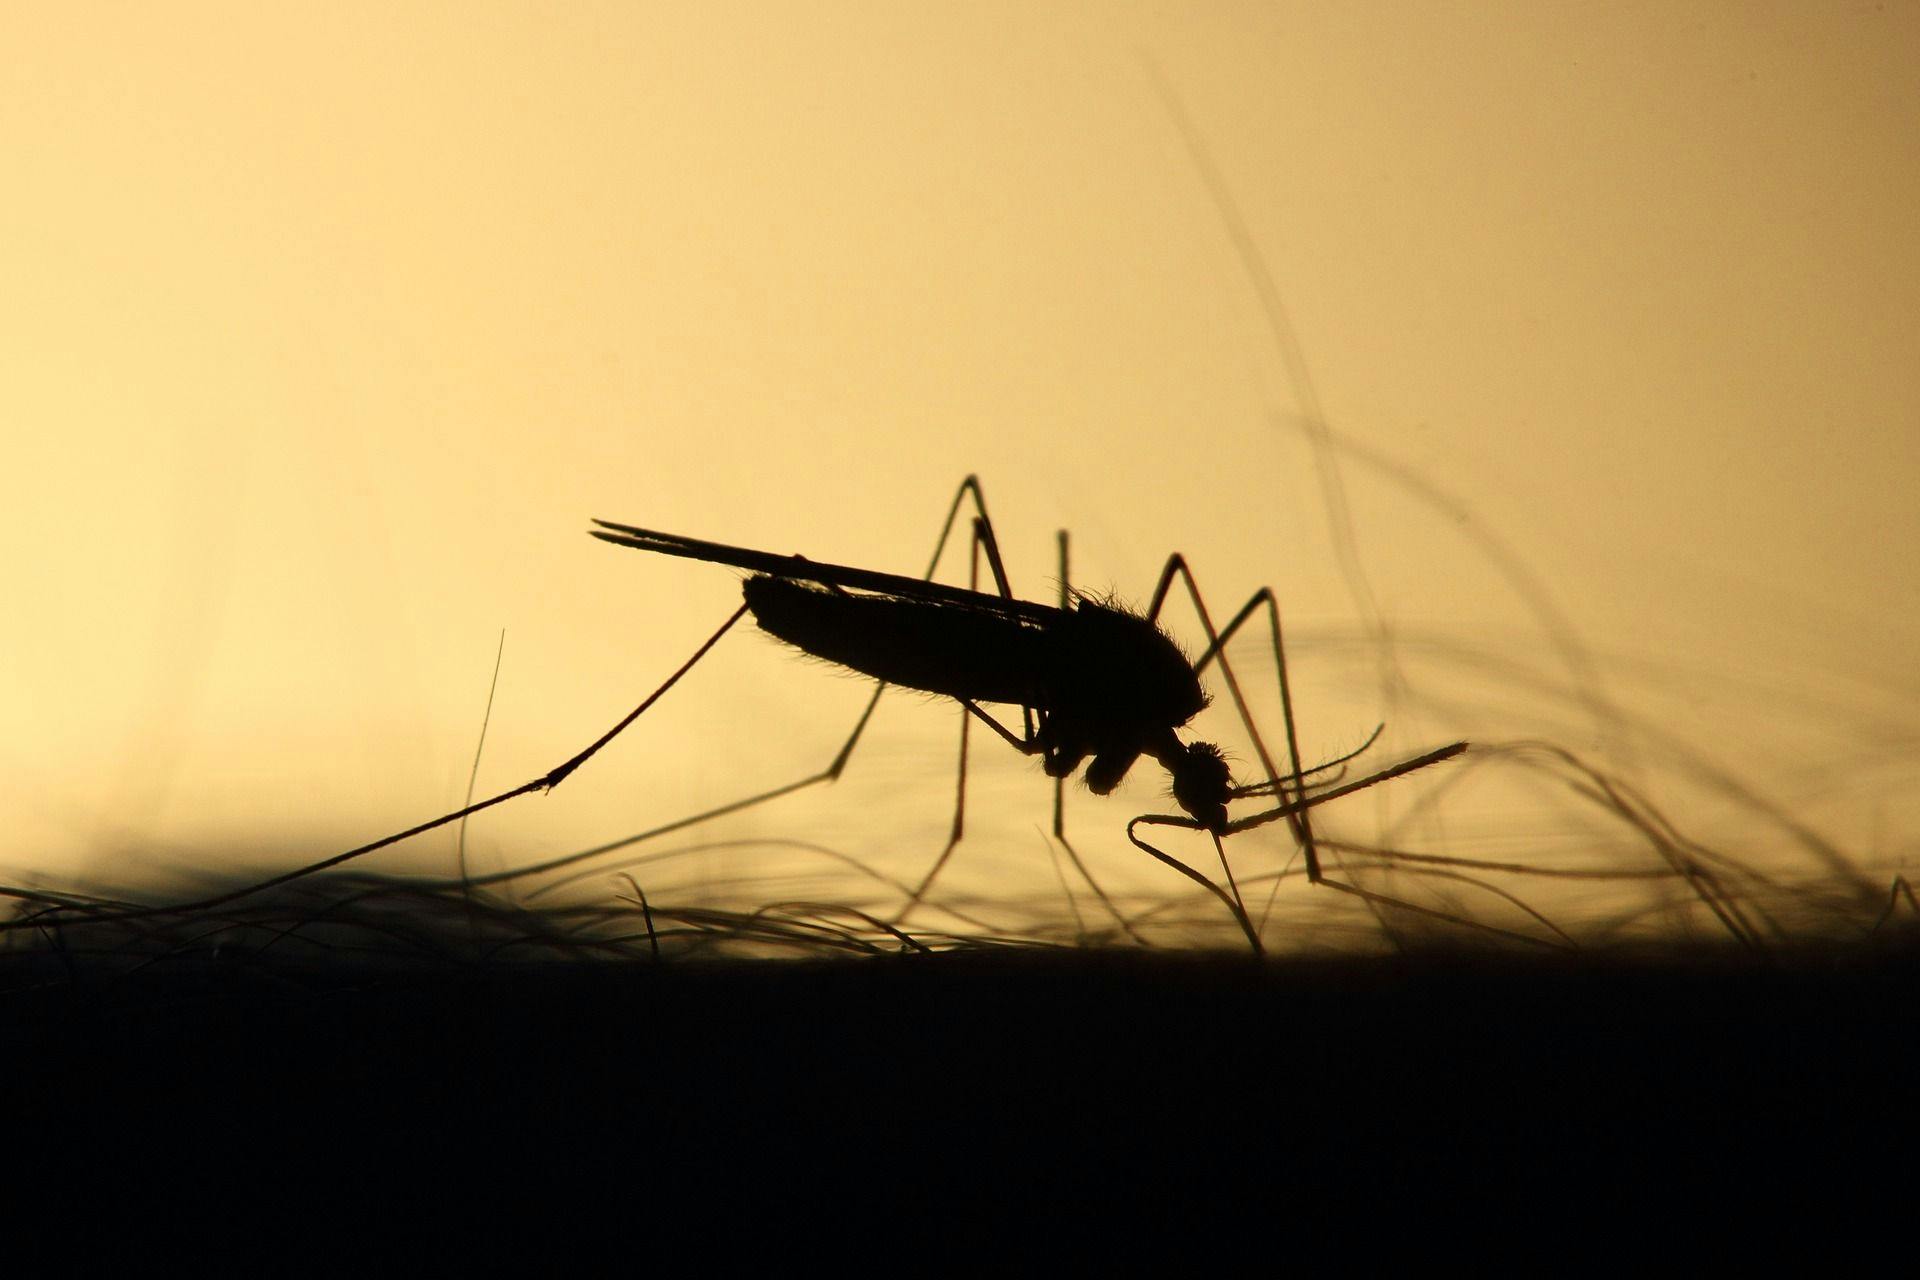 Study: International Travel May Be Linked to Rise in US Malaria Rate